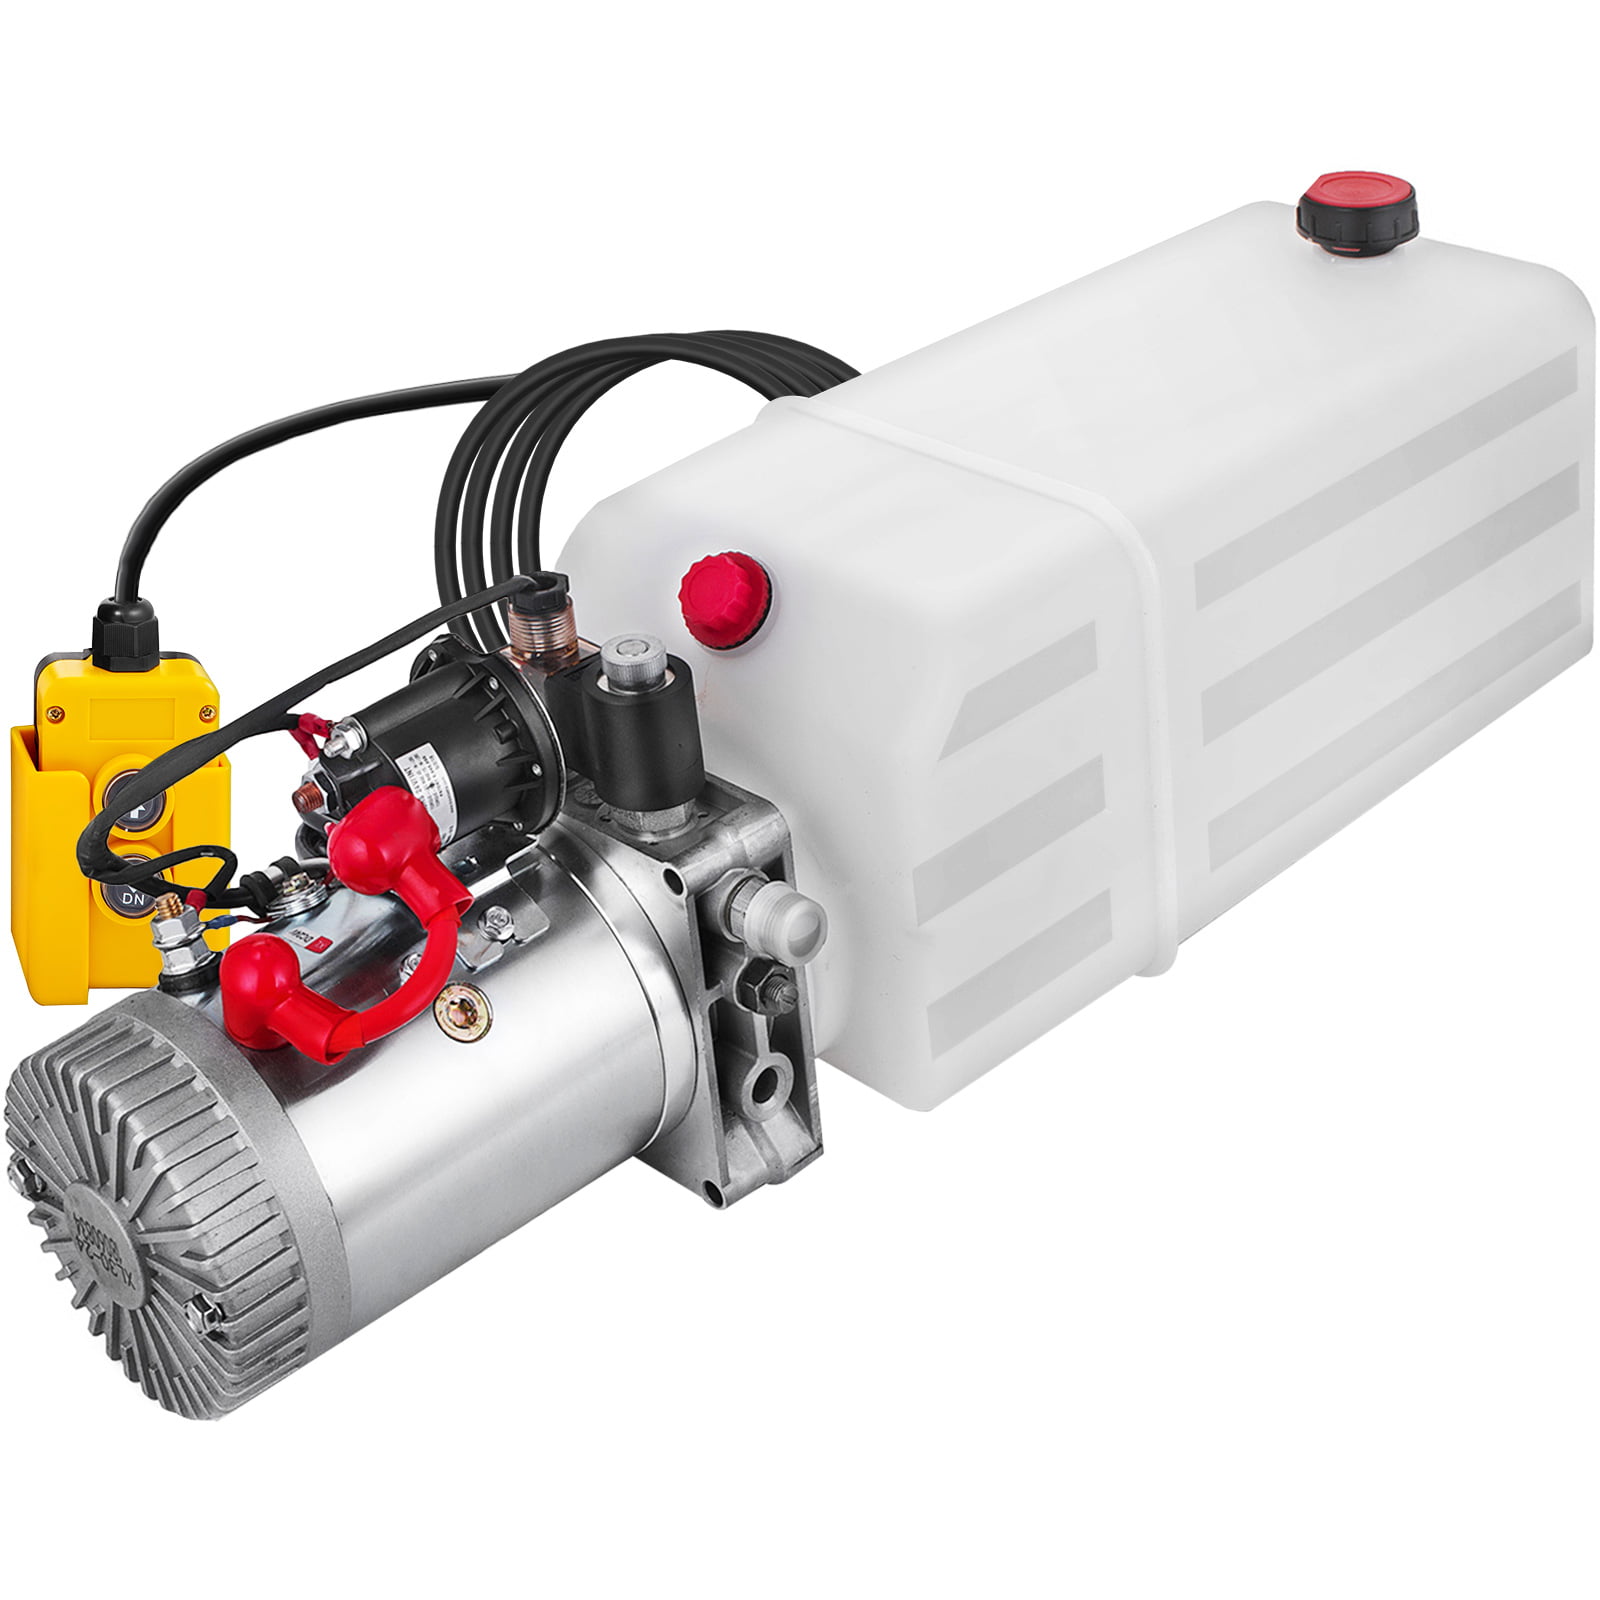 Hydraulic Power Pack 24v DC Micro Single Acting /w 0.5 Litre Plastic Tank 